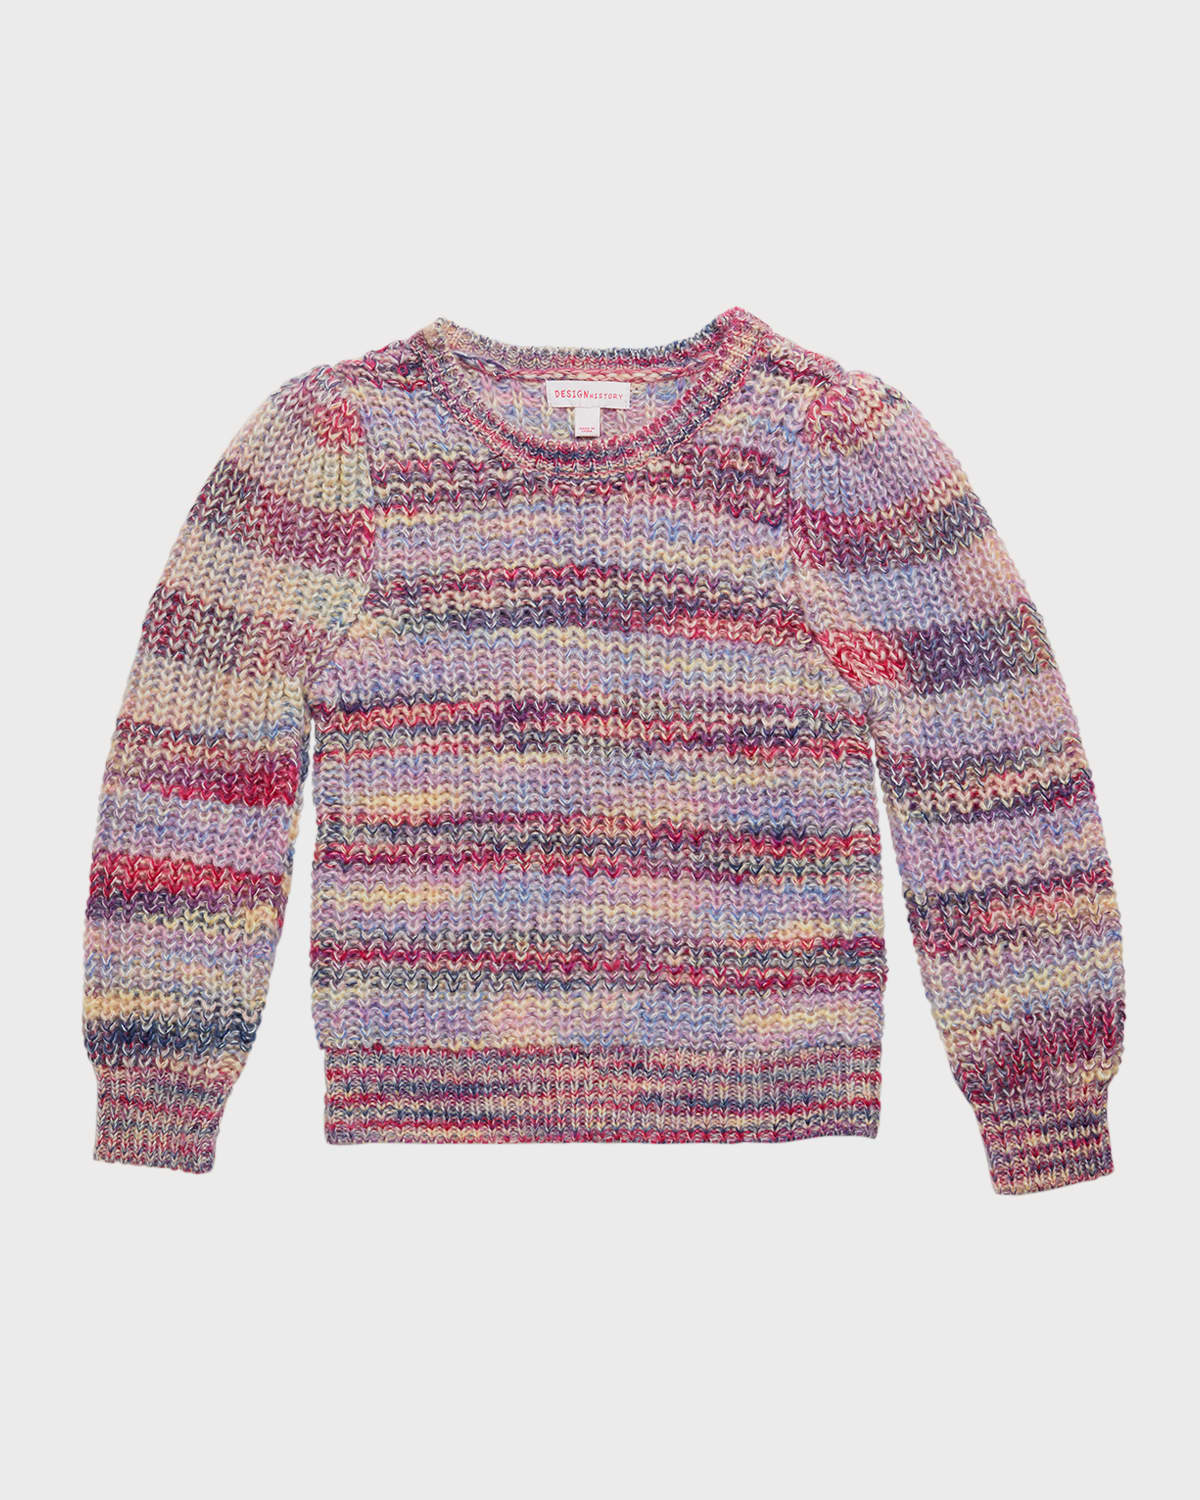 Girl's Space Dye Pullover Sweater, Size 4-6X